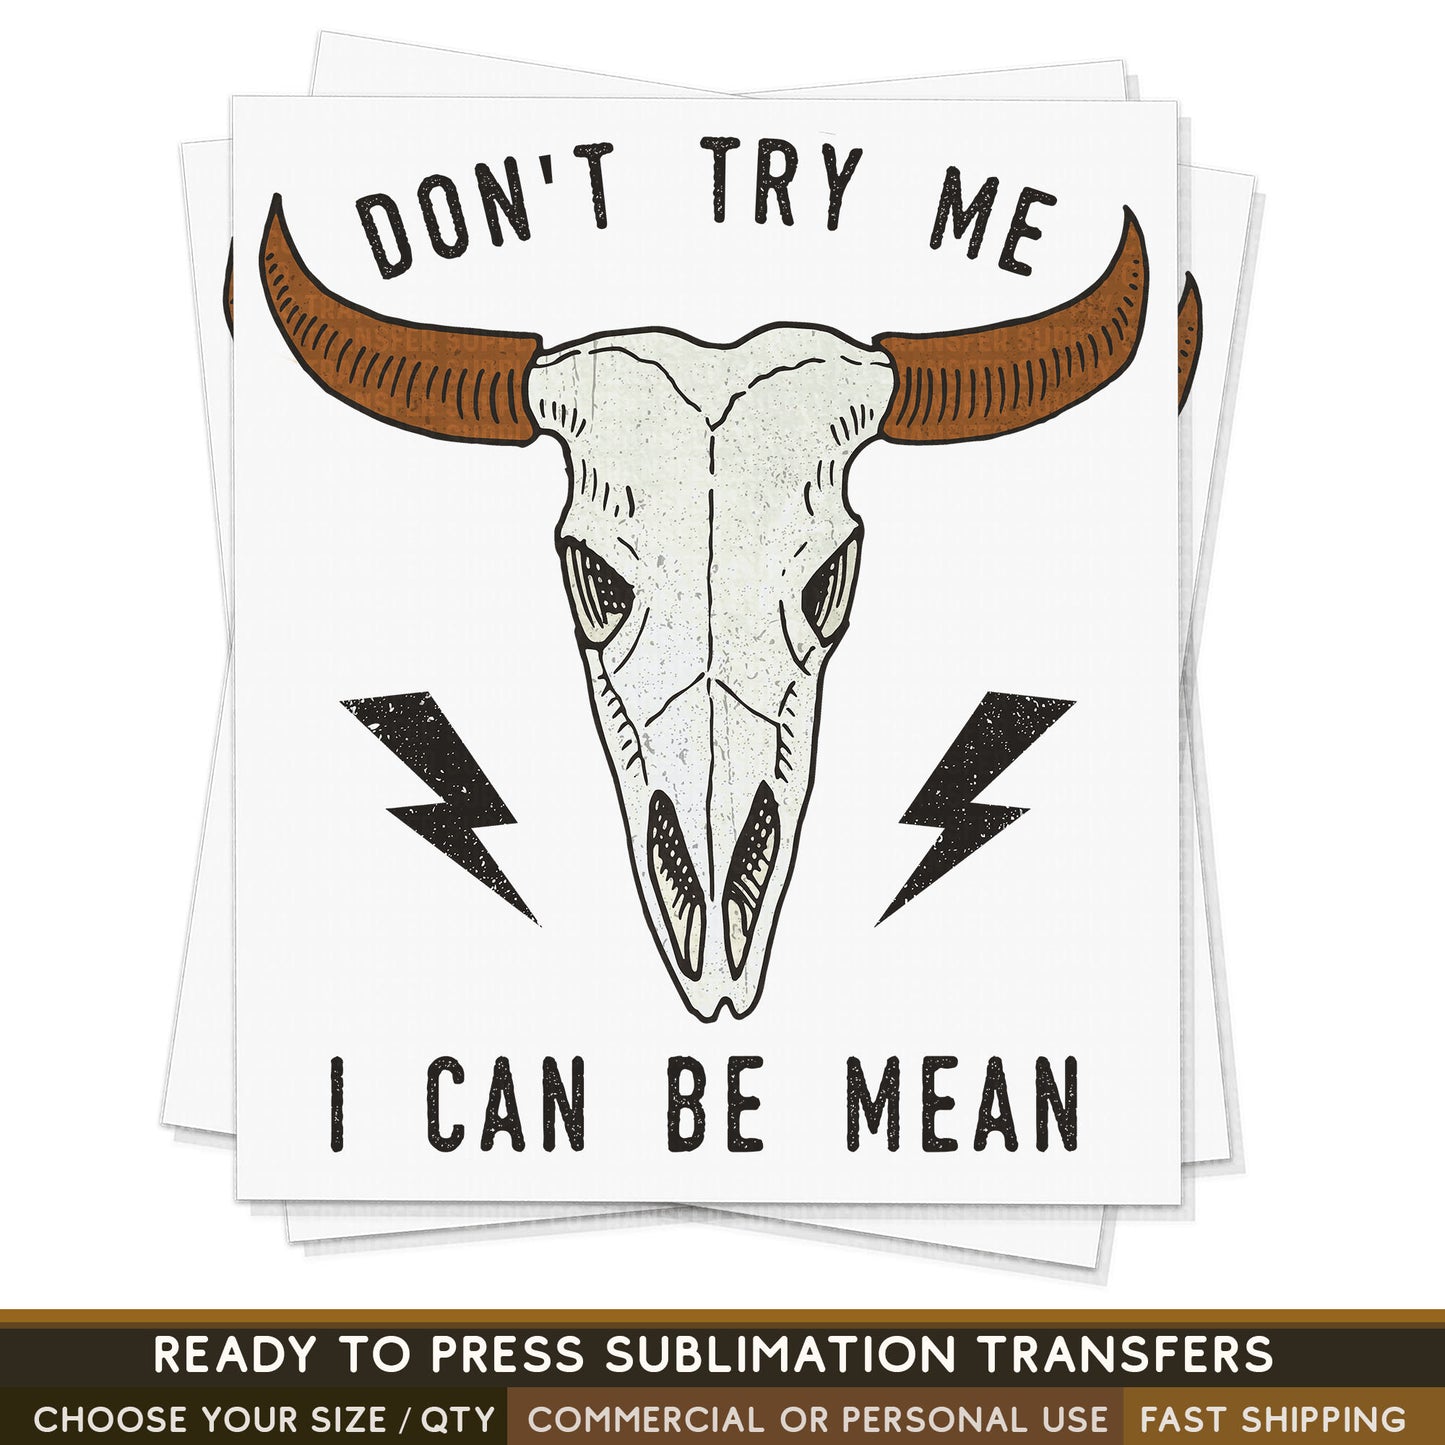 Don't Try Me Cow Skull Vintage Wild West Western, Ready To Press Sublimation Transfers, Ready To Press Transfers, Sublimation Print